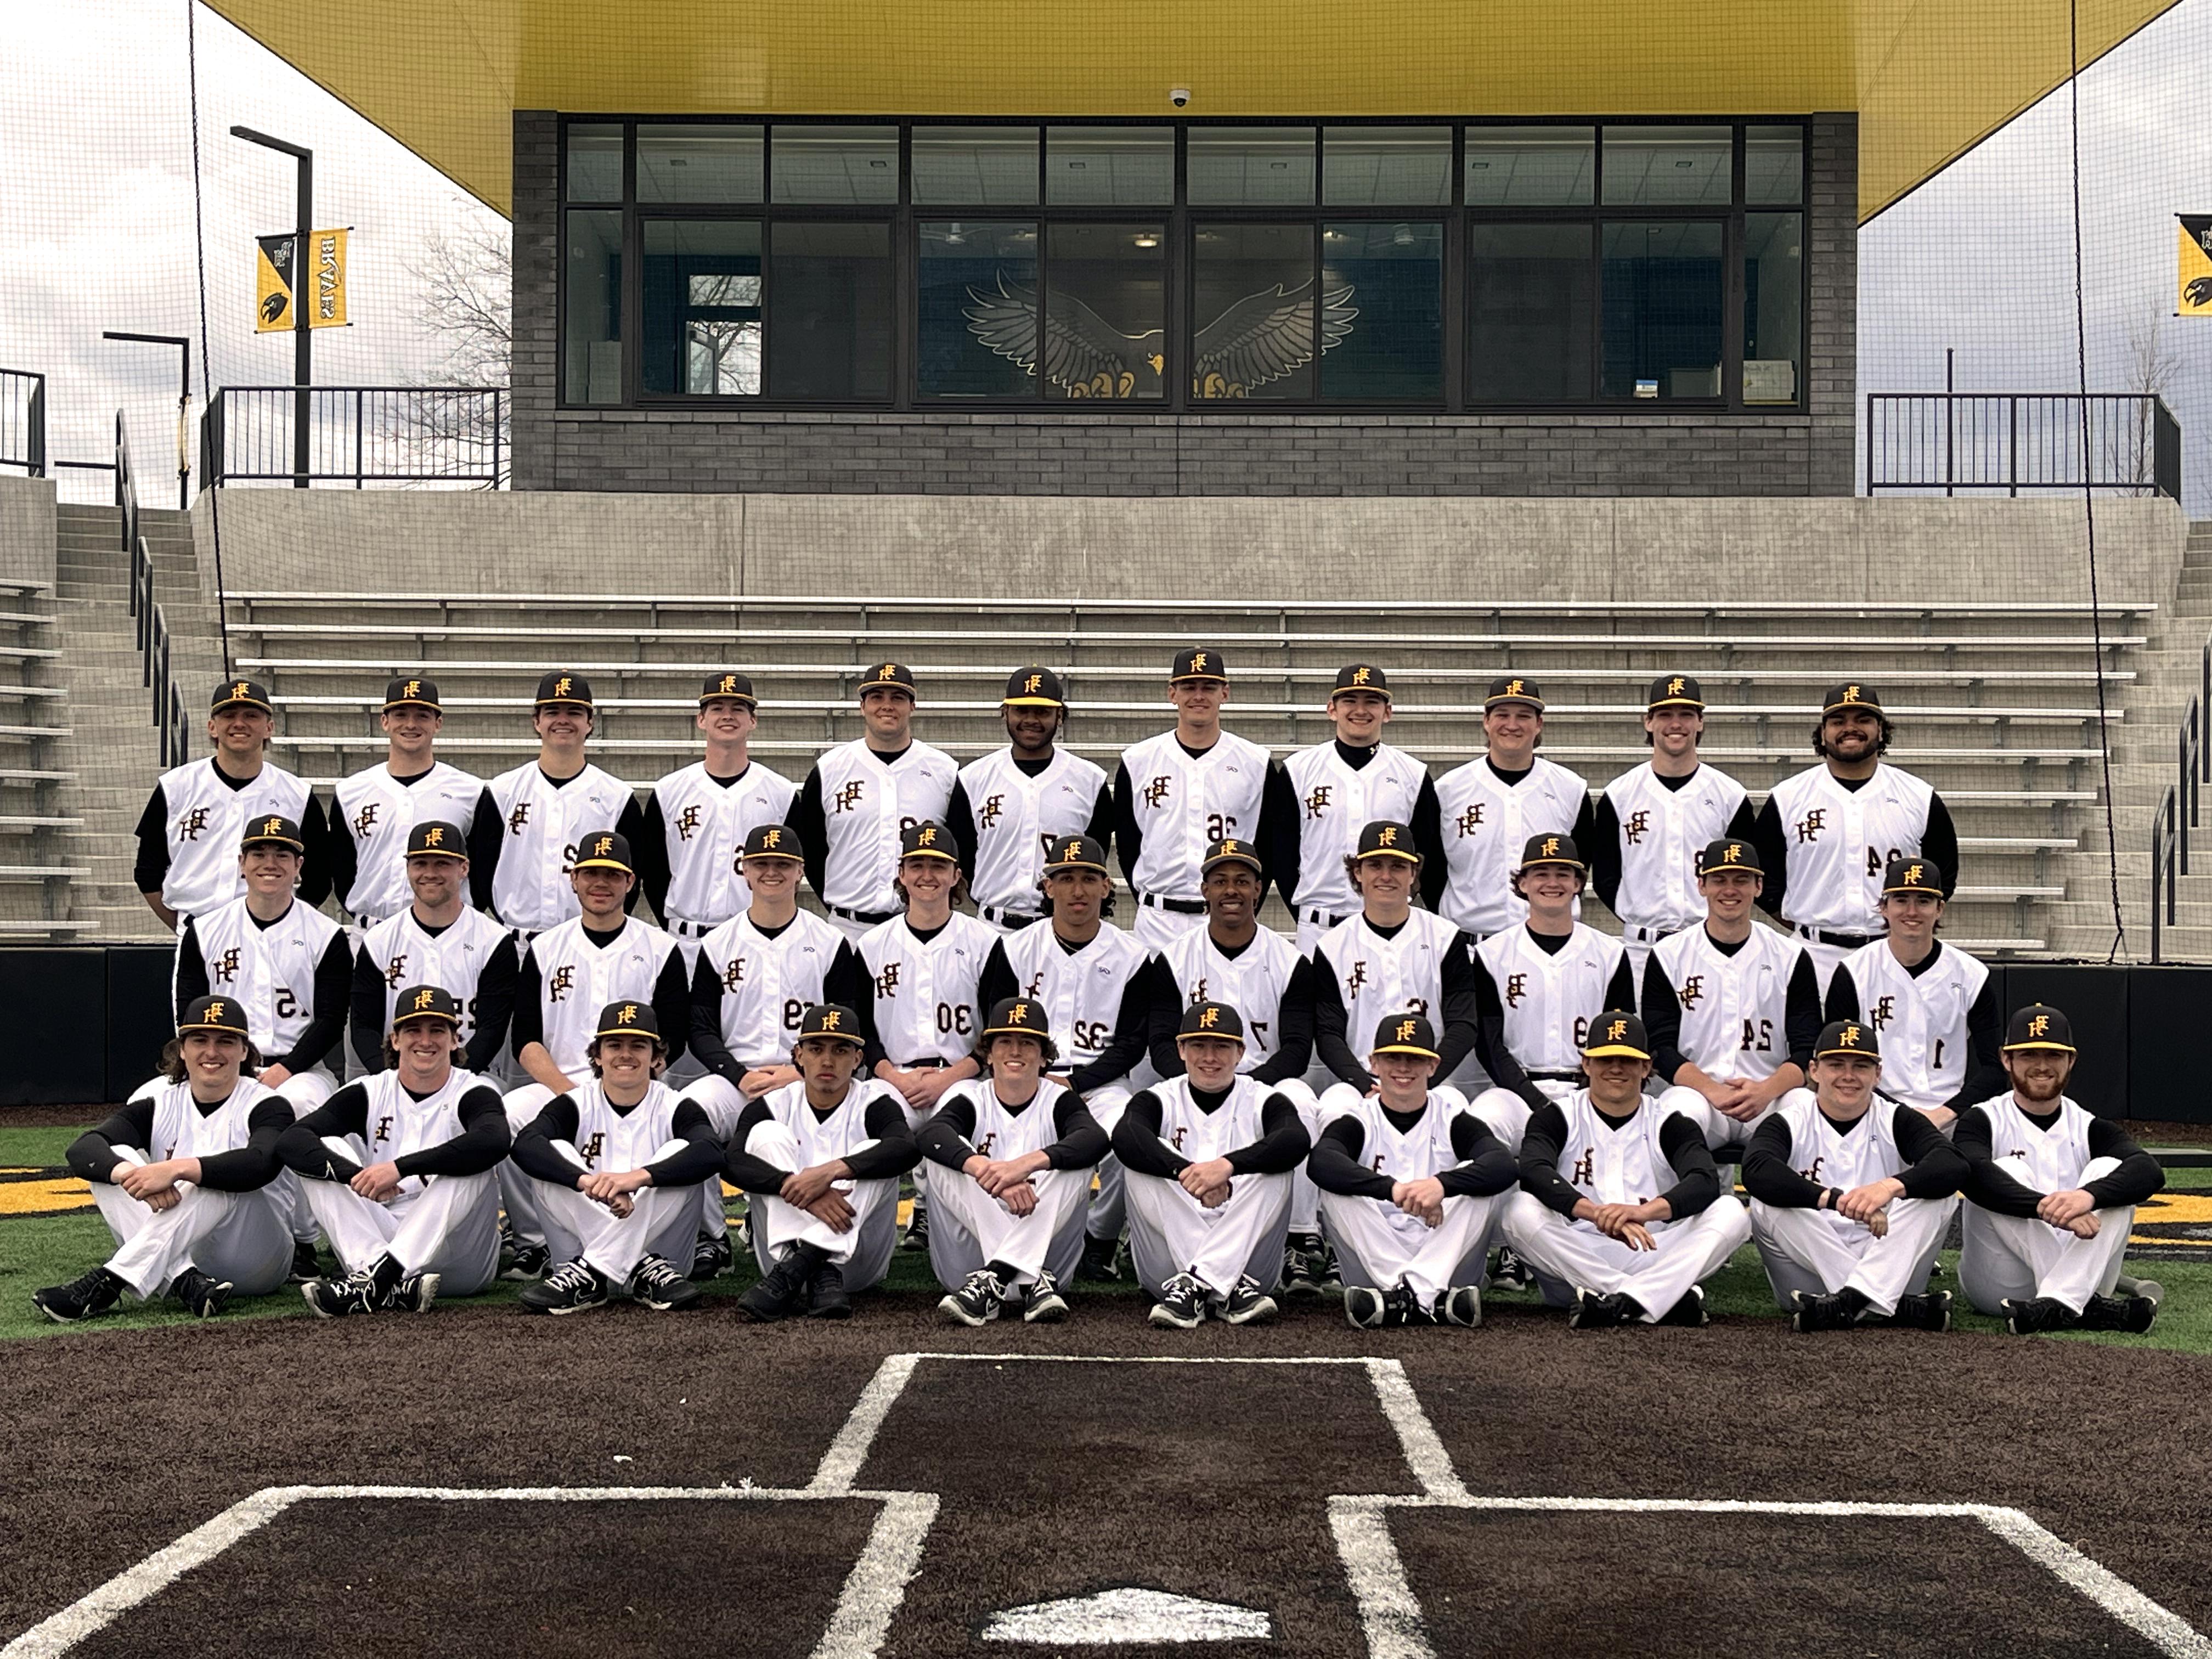 Baseball Team Photo. Click for high resolution download